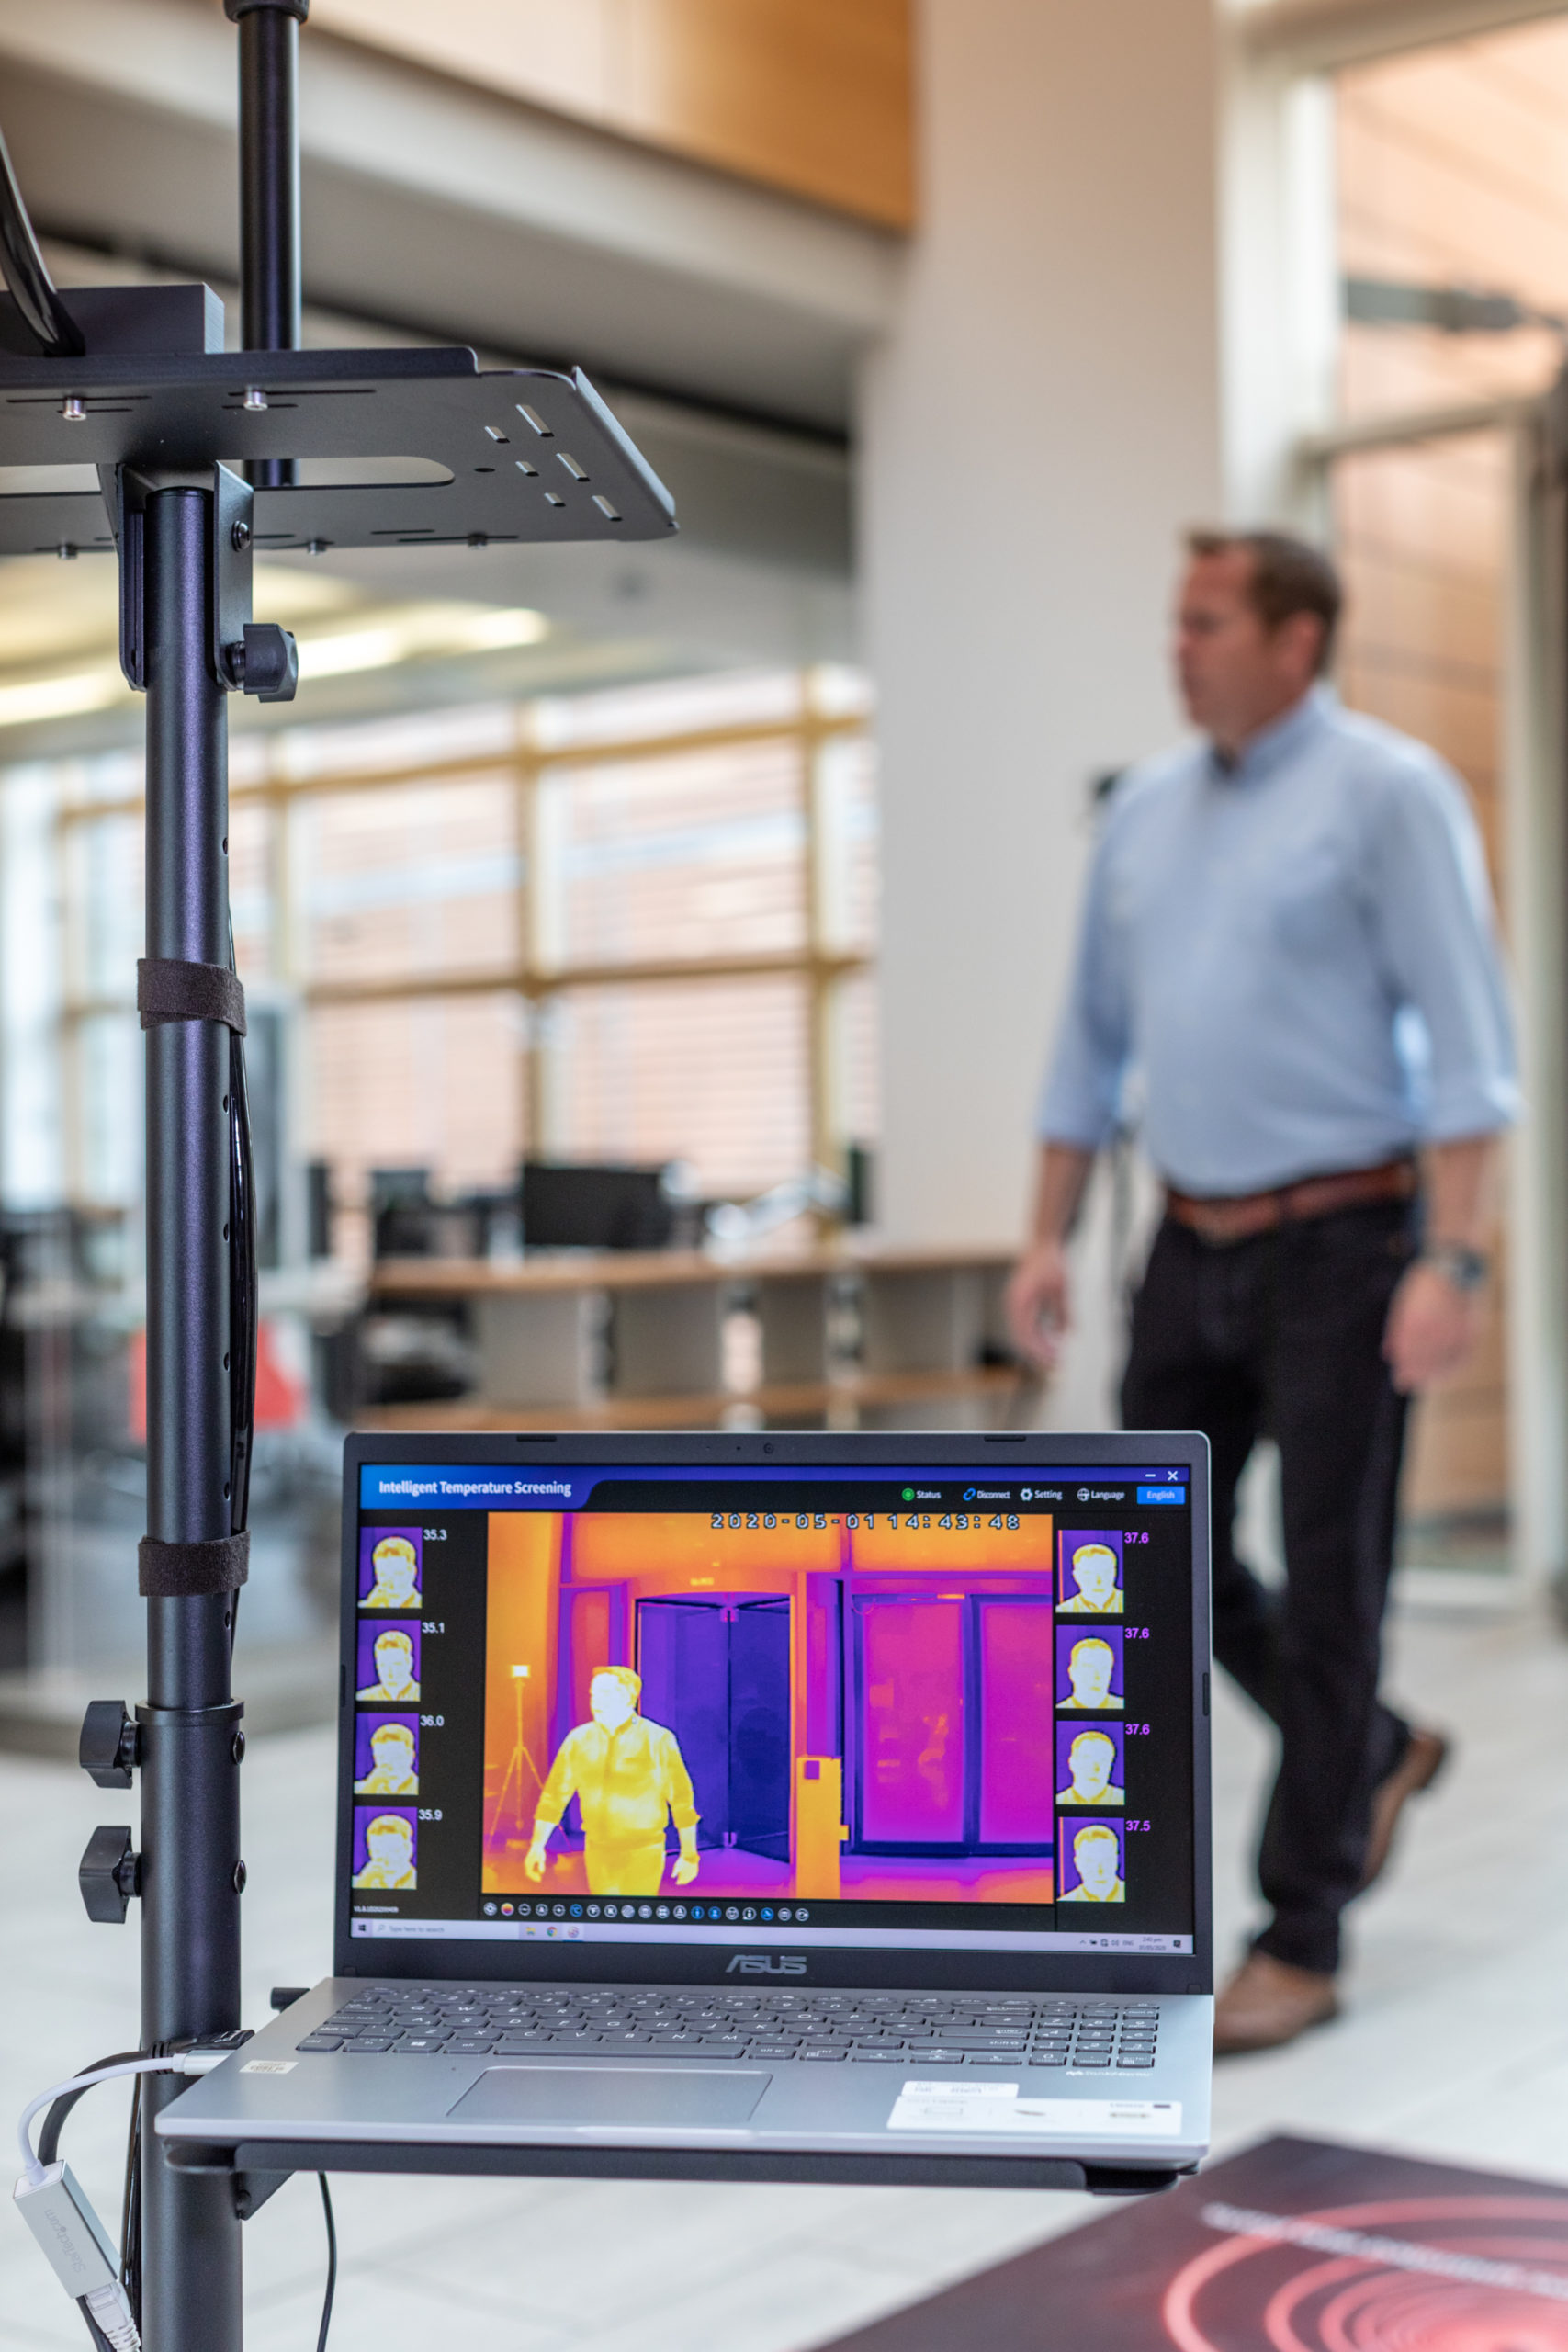 Vodafone helps the UK back to work safely with NEW IoT-enabled heat detection camera